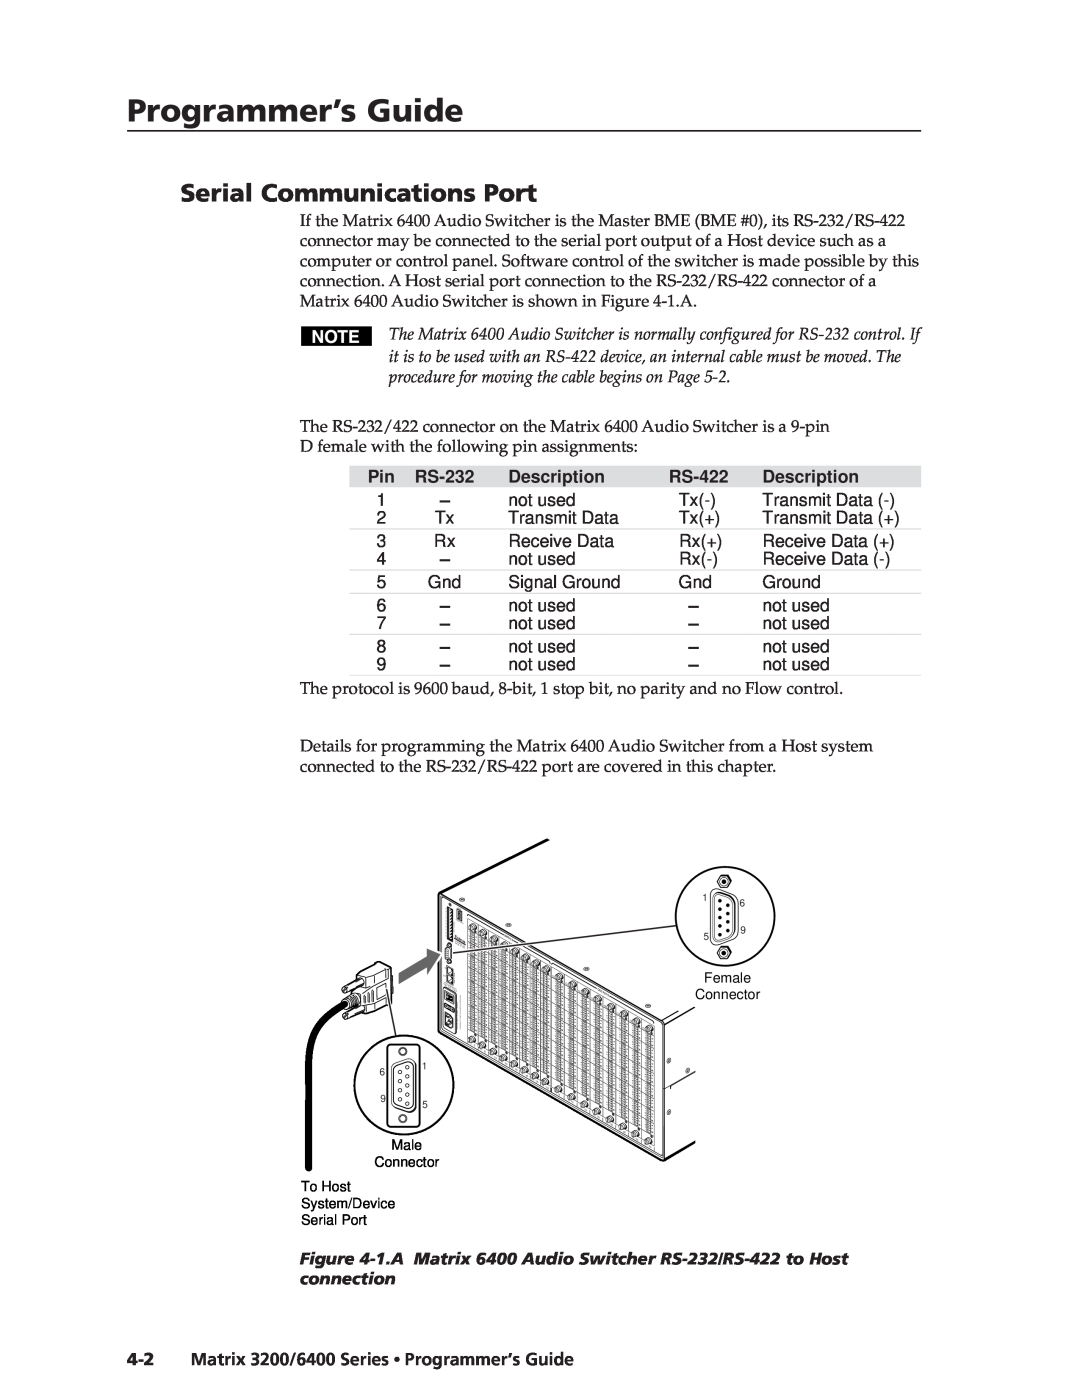 Extron electronic 3200s manual Programmer’ser’sGuide,Guidecont’d, Serial Communications Port 